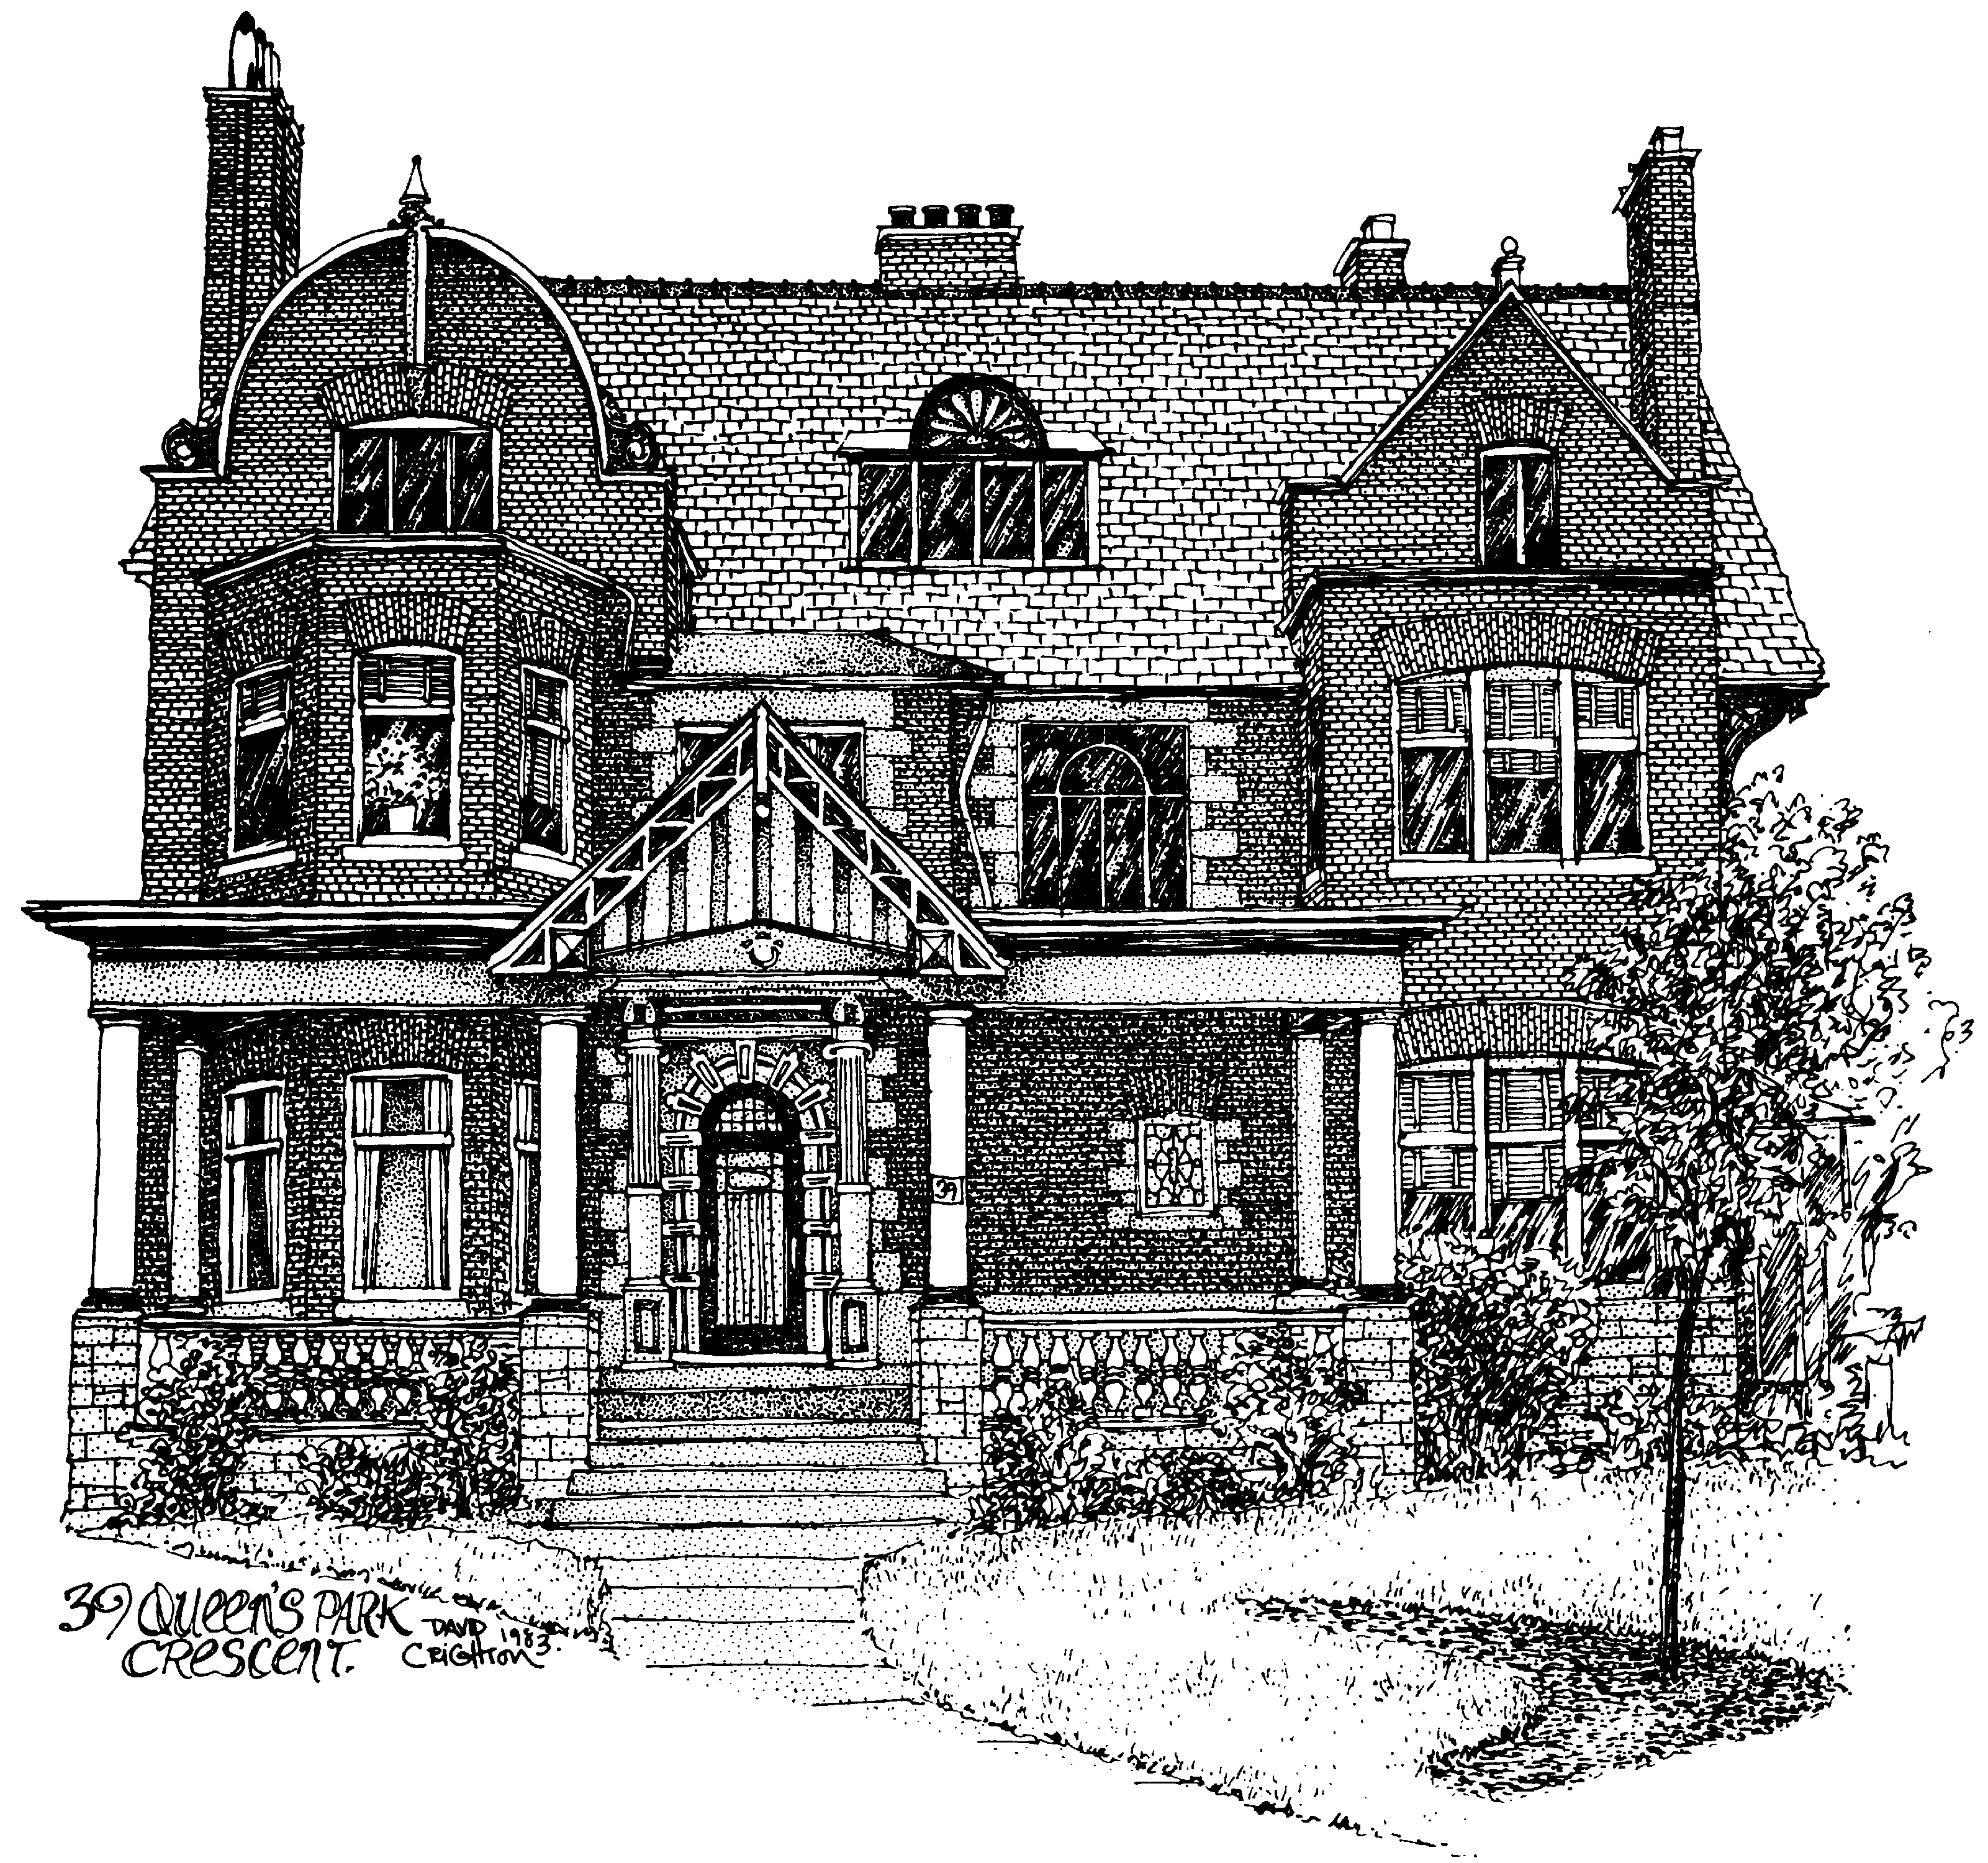 Sketch of the Old CMS Building on Queen's Park